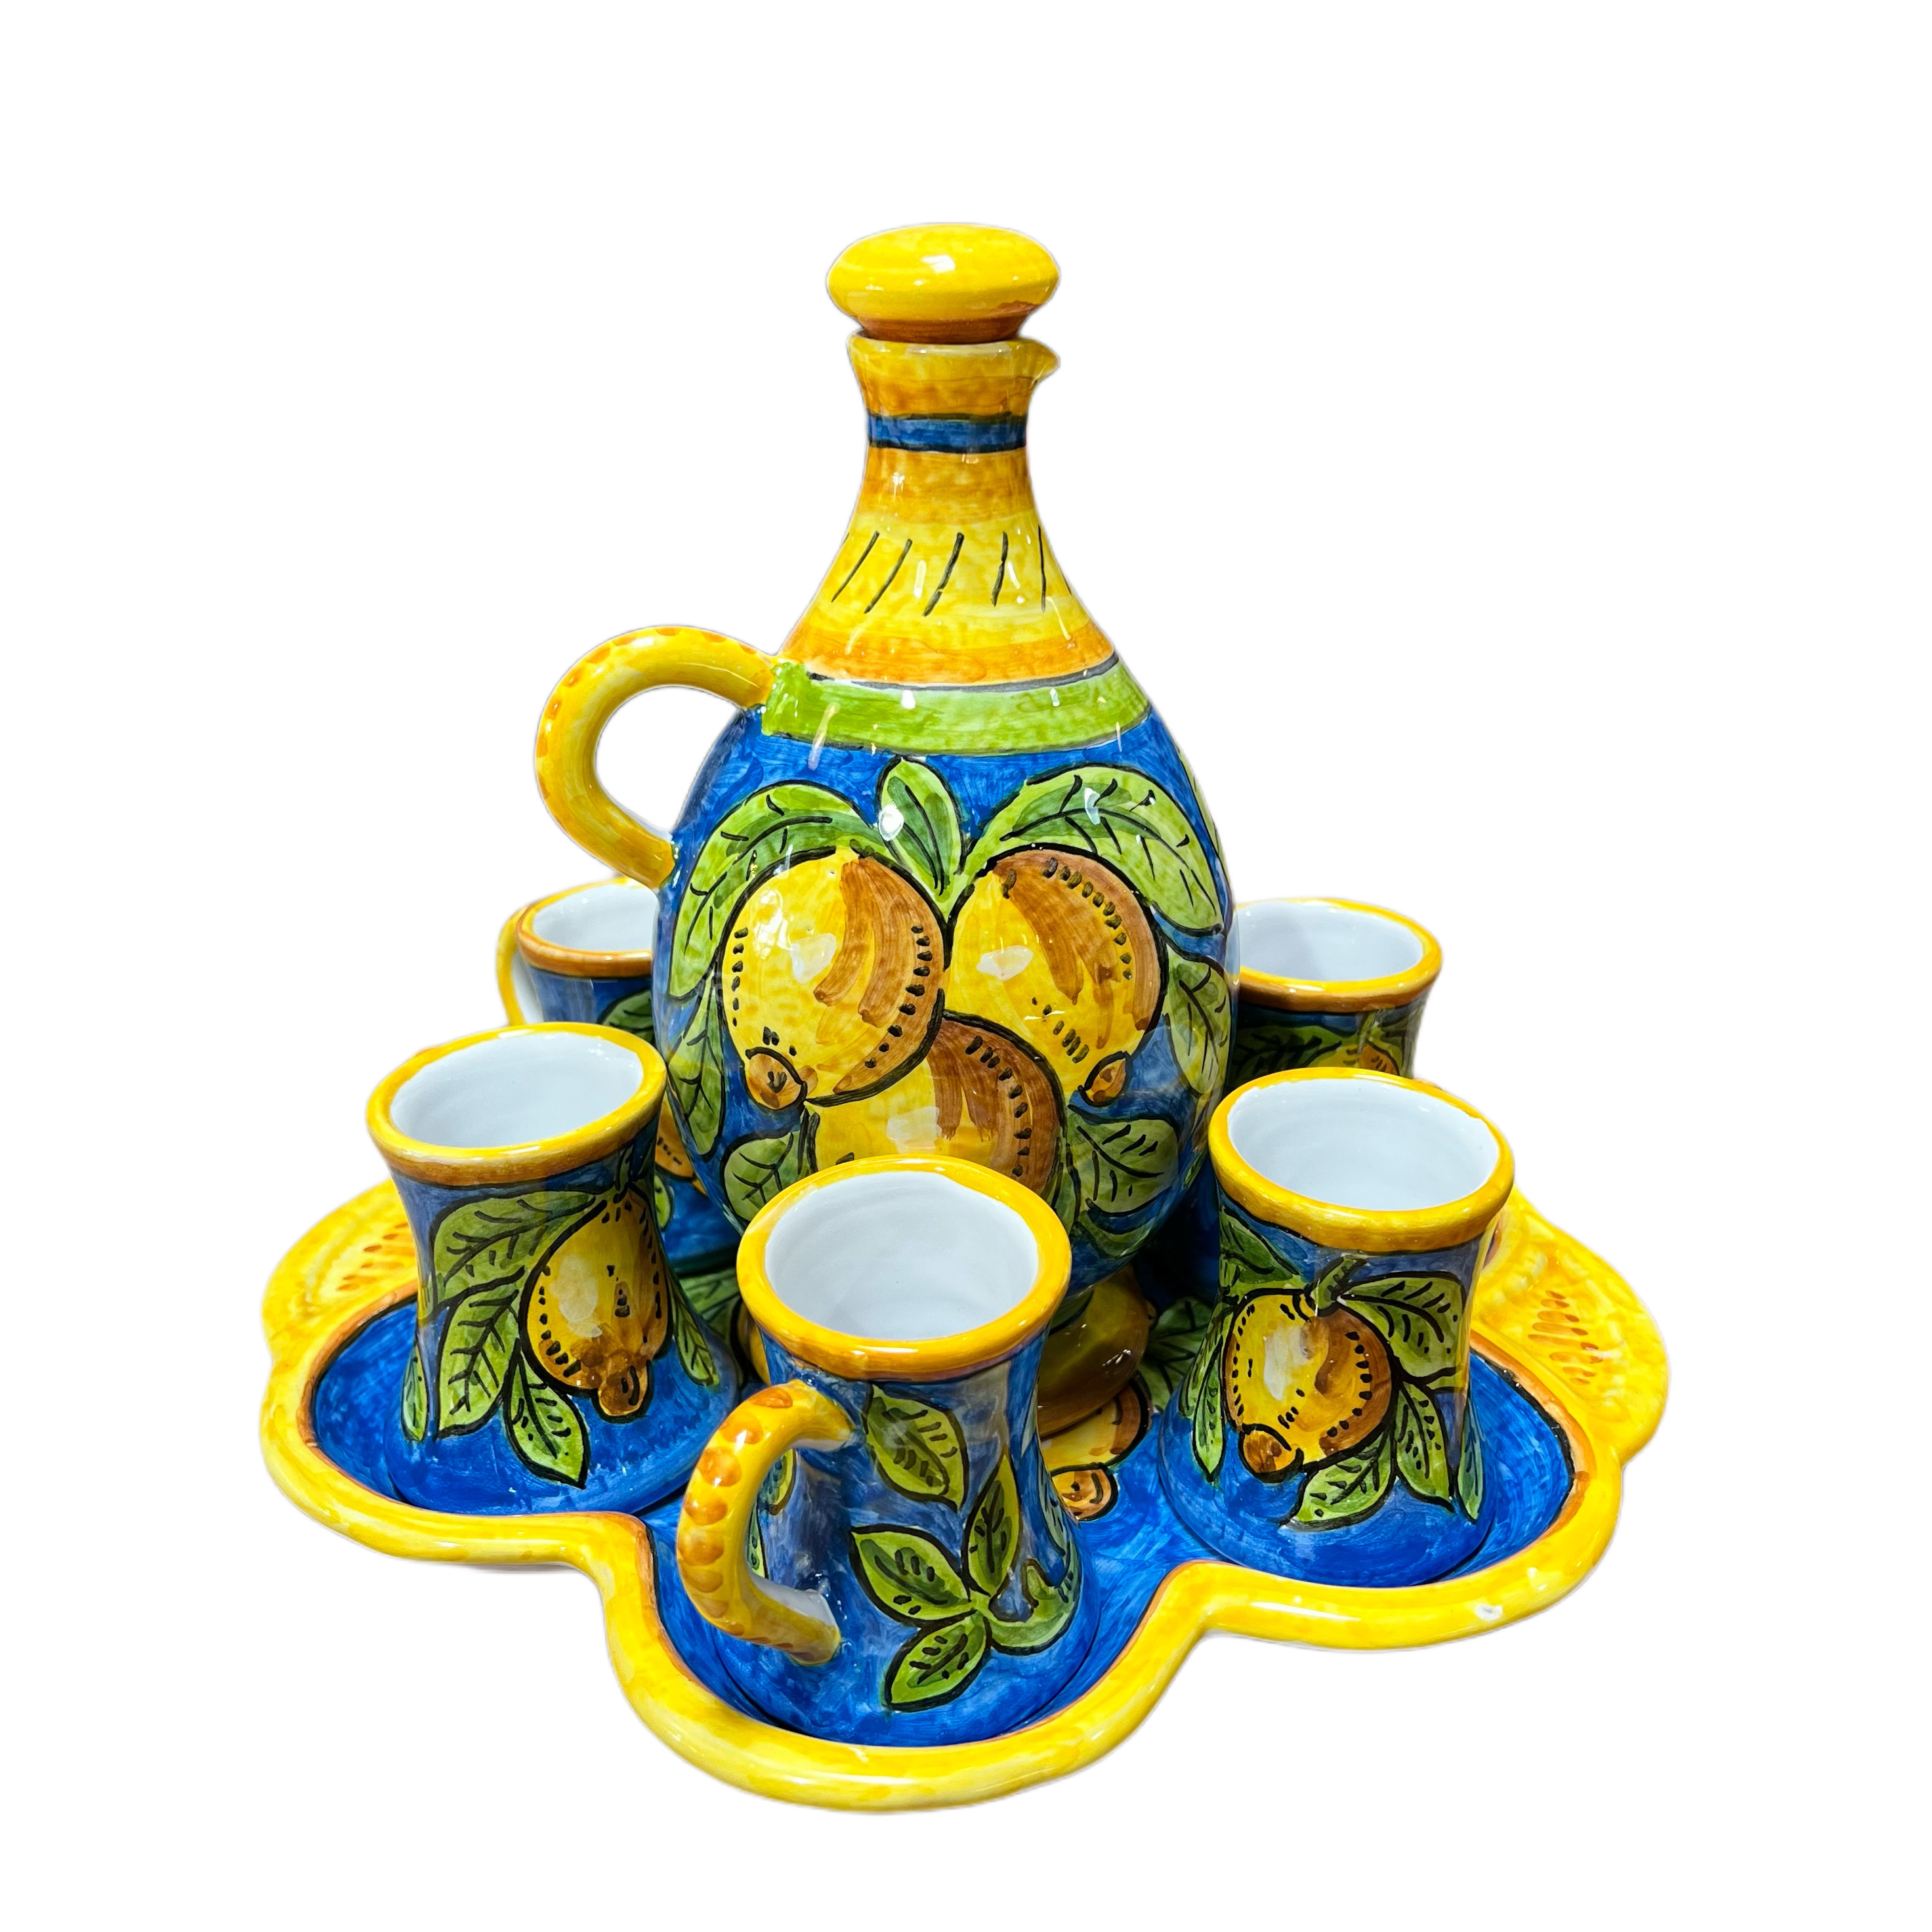 Italian Ceramic Limoncello Pottery Set Tray Lemon Design - Hand Painted  Limoncello Liqueur Shot Glasses for Kitchen - Made in ITALY Tuscany 